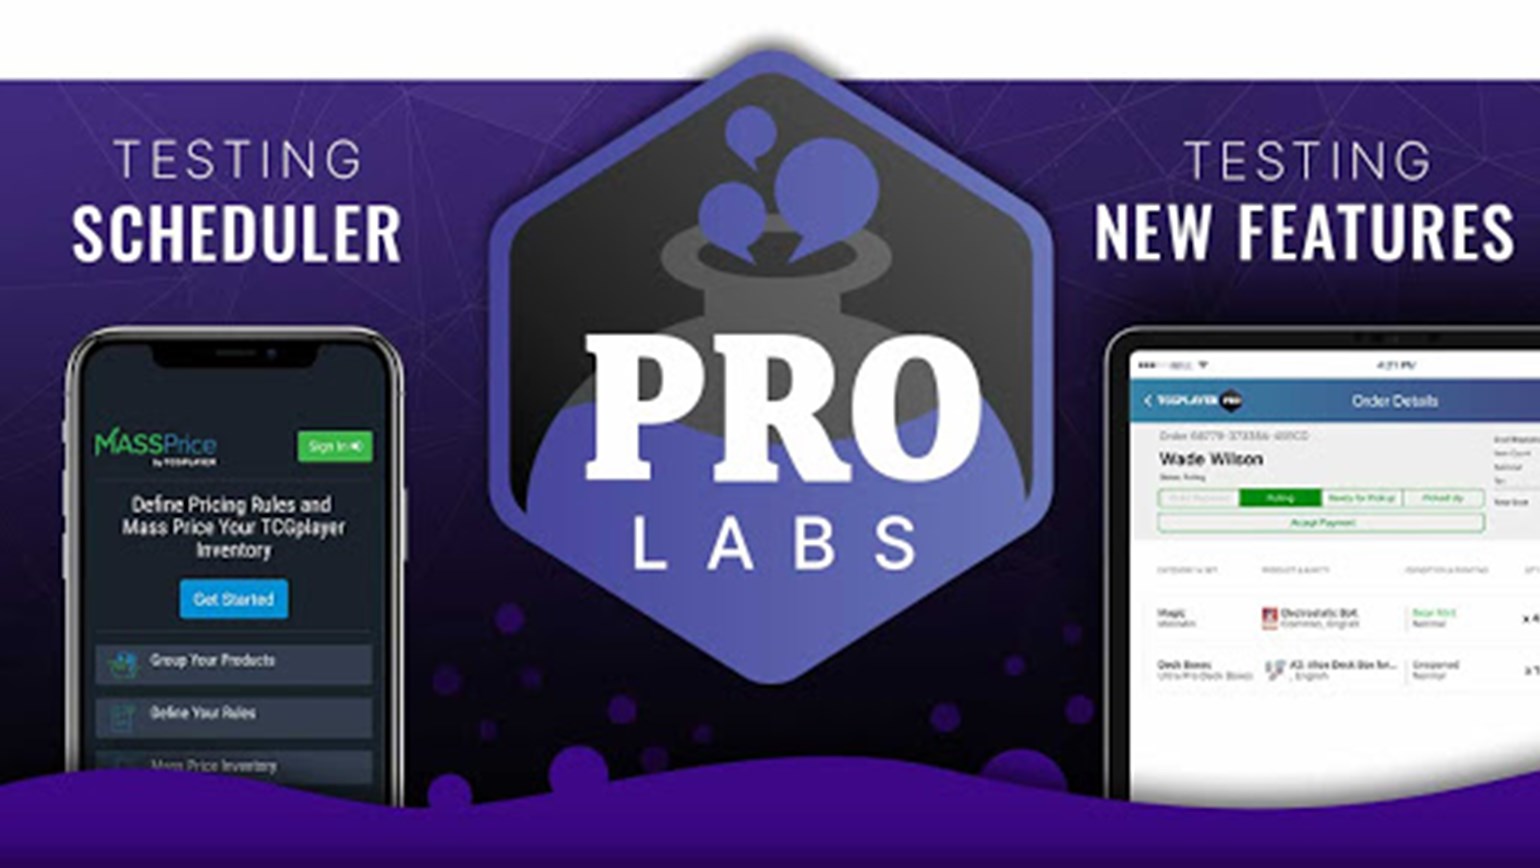 Upcoming Pro Labs: Automate Pricing, New Kiosk Experience and More!